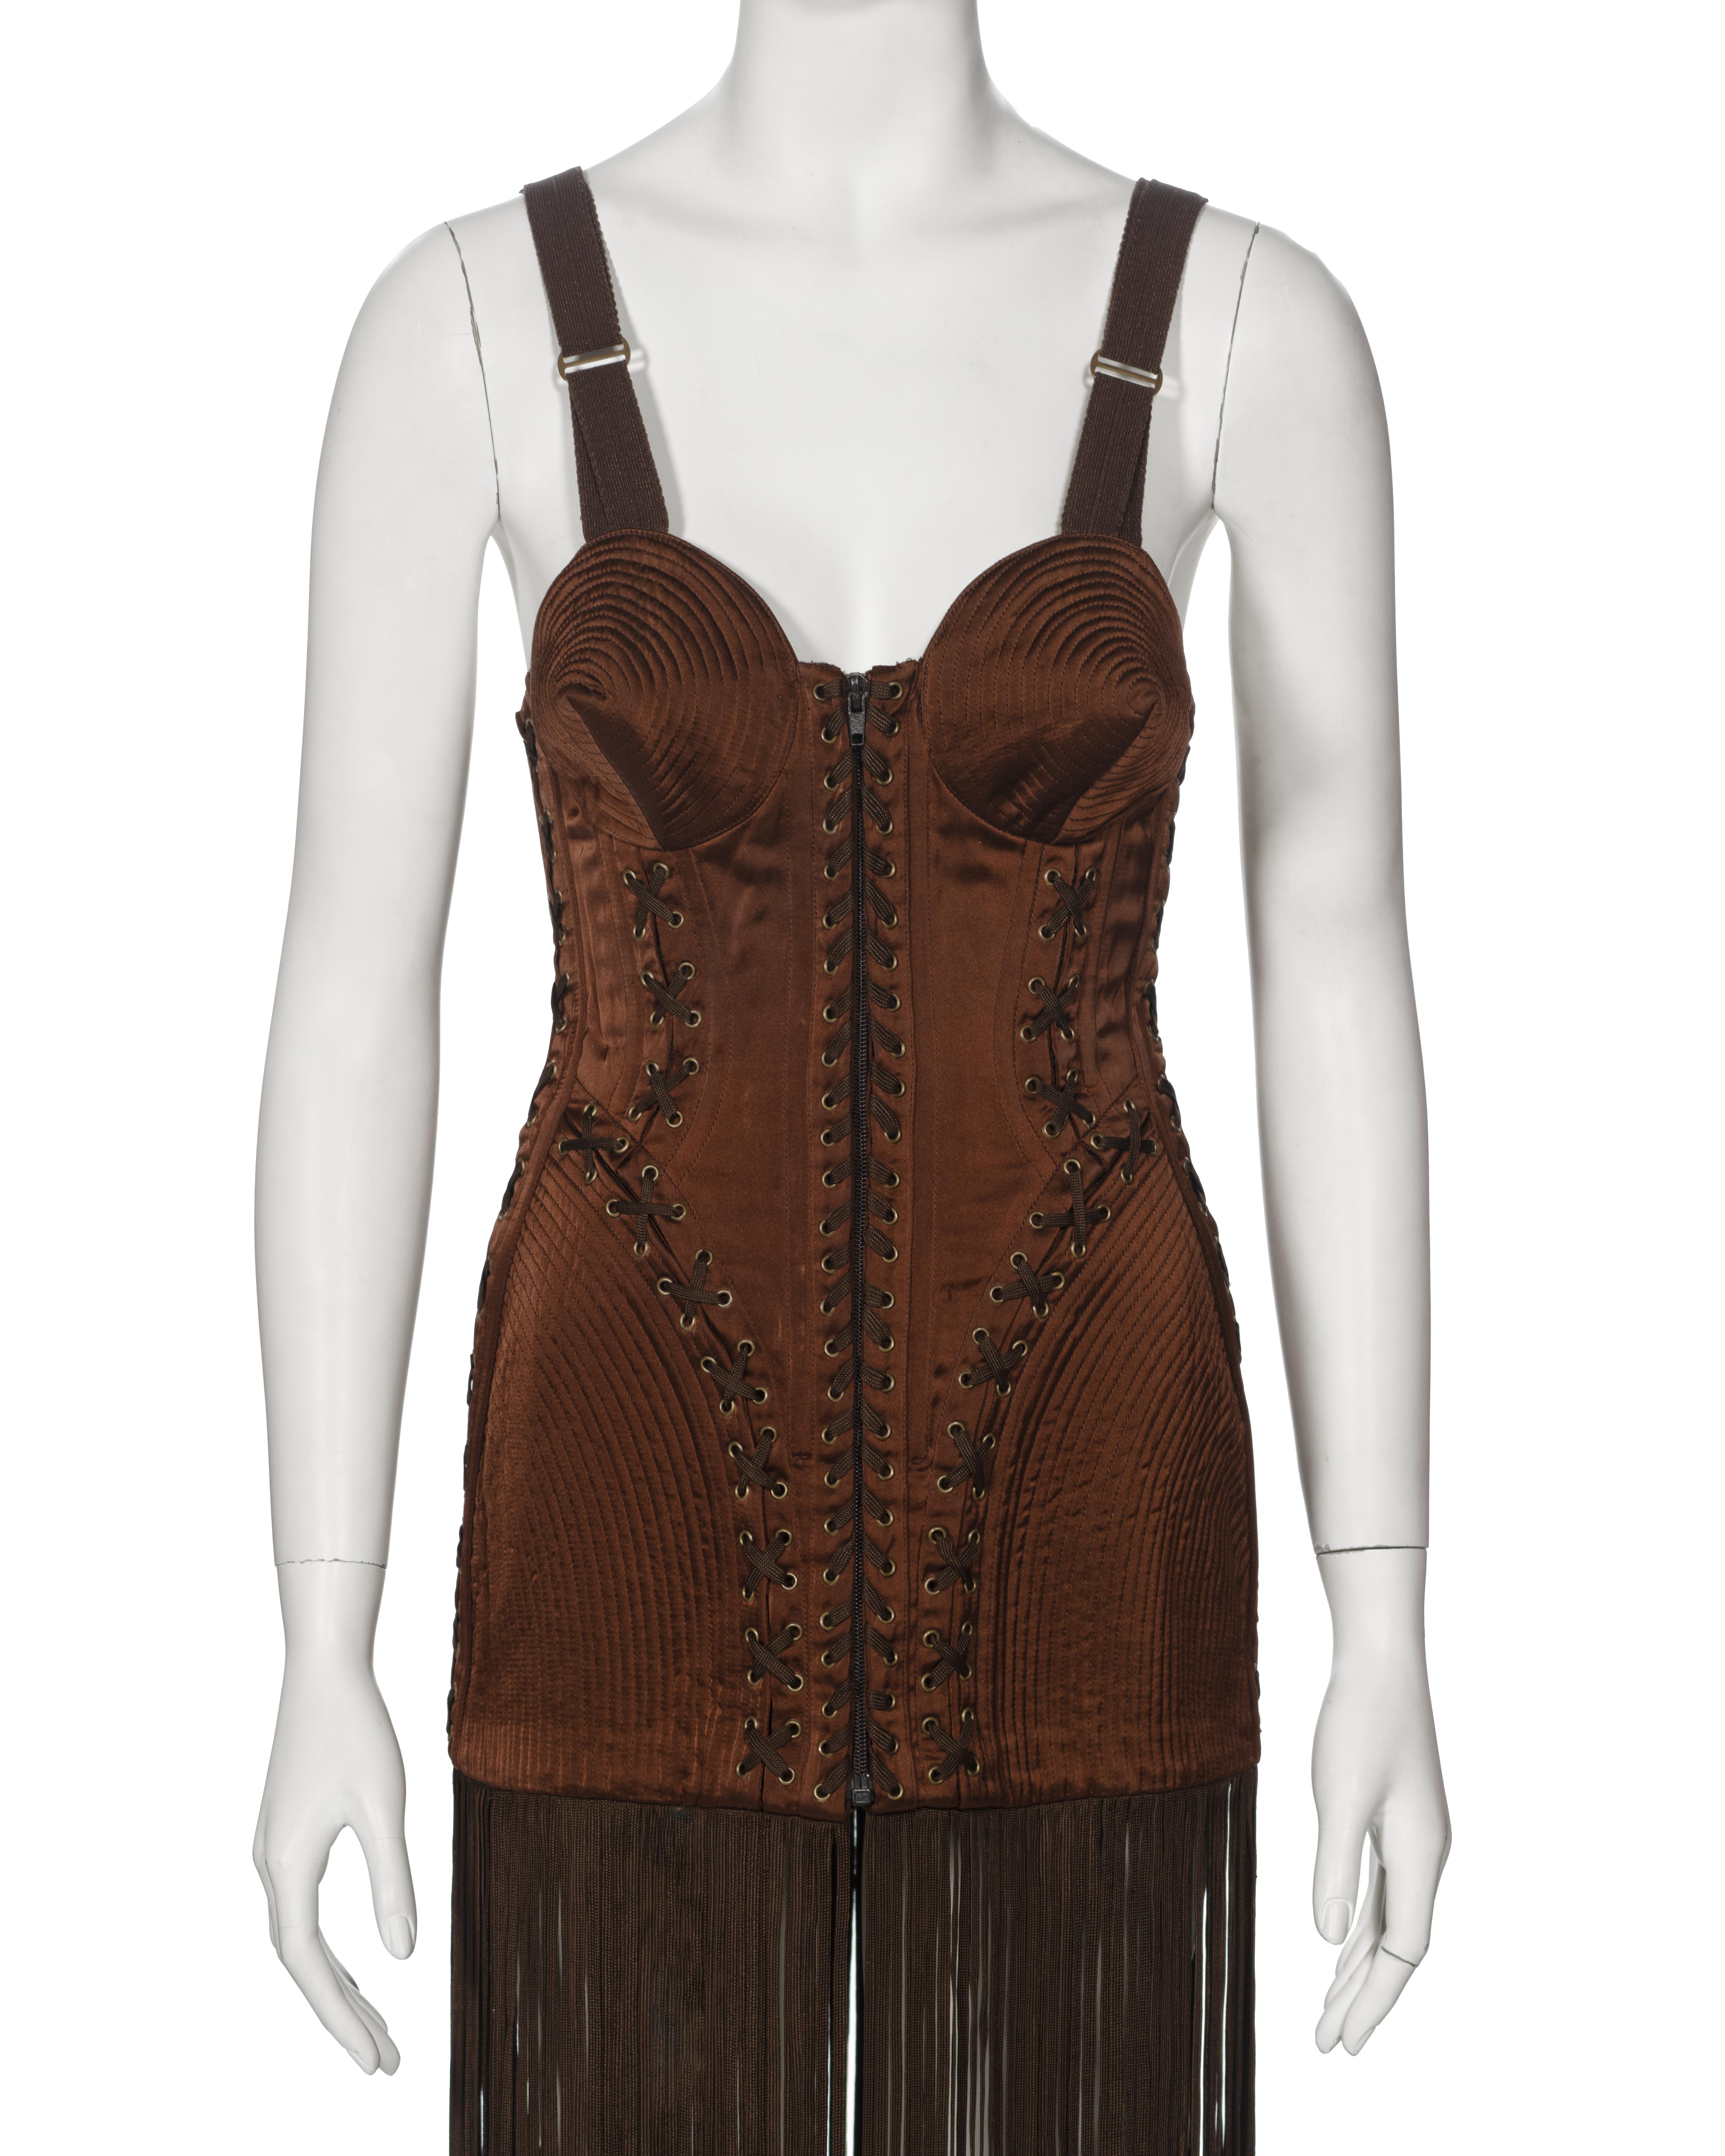 Jean Paul Gaultier Brown Corset Dress with Cone Bra and Fringed Hem, fw 1990 In Excellent Condition For Sale In London, GB